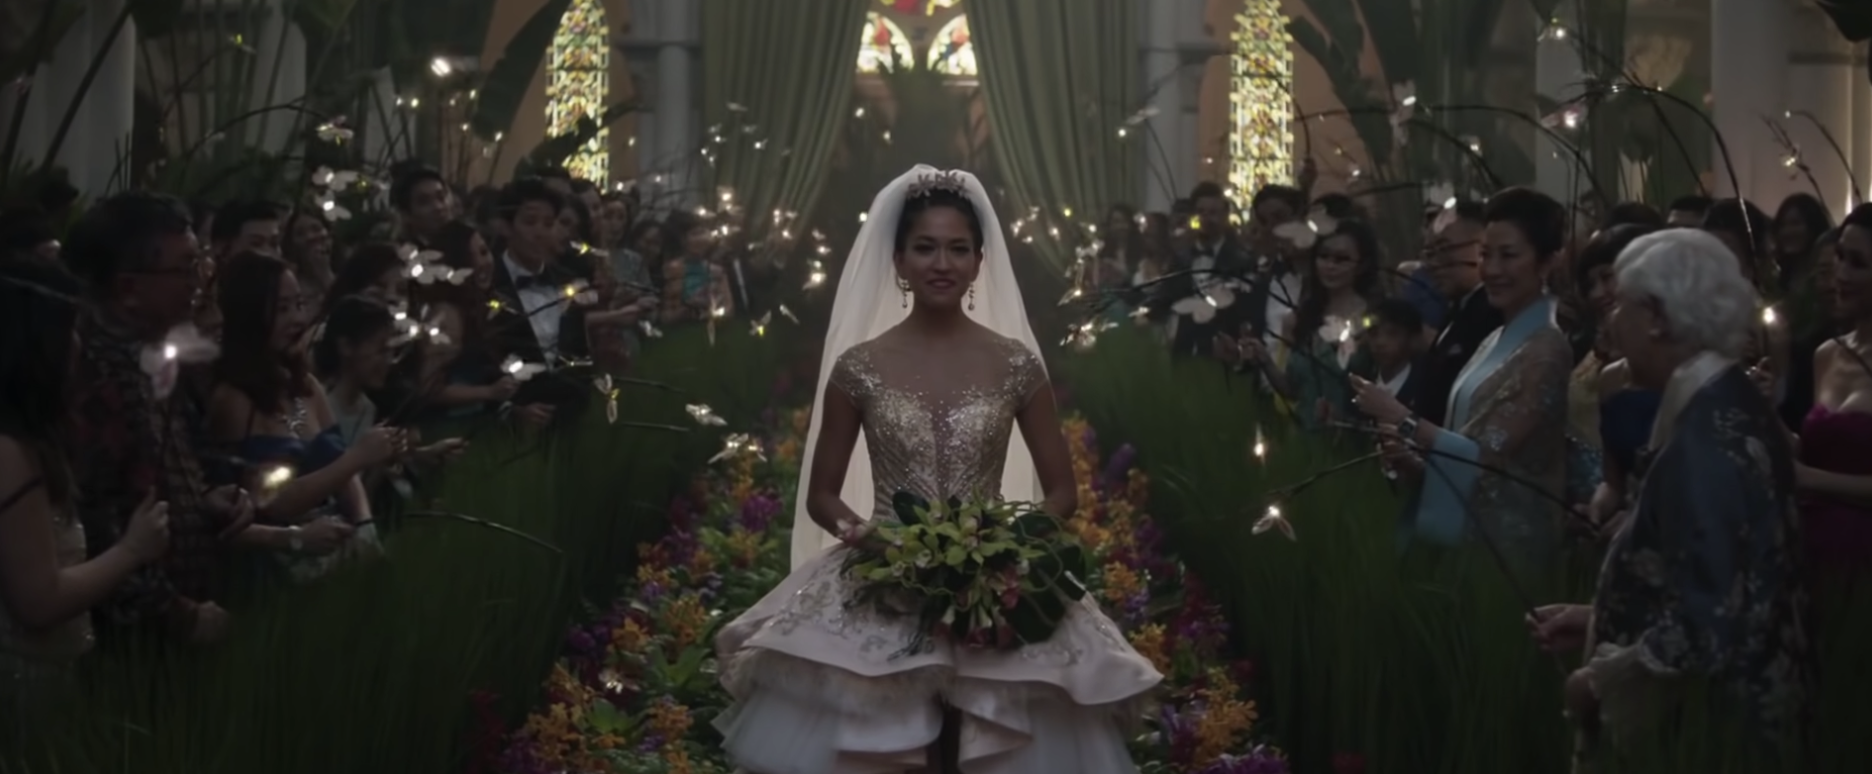 A bride walks down the aisle of a church holding a large bouquet of flowers, guests are holding glowing orbs on sticks